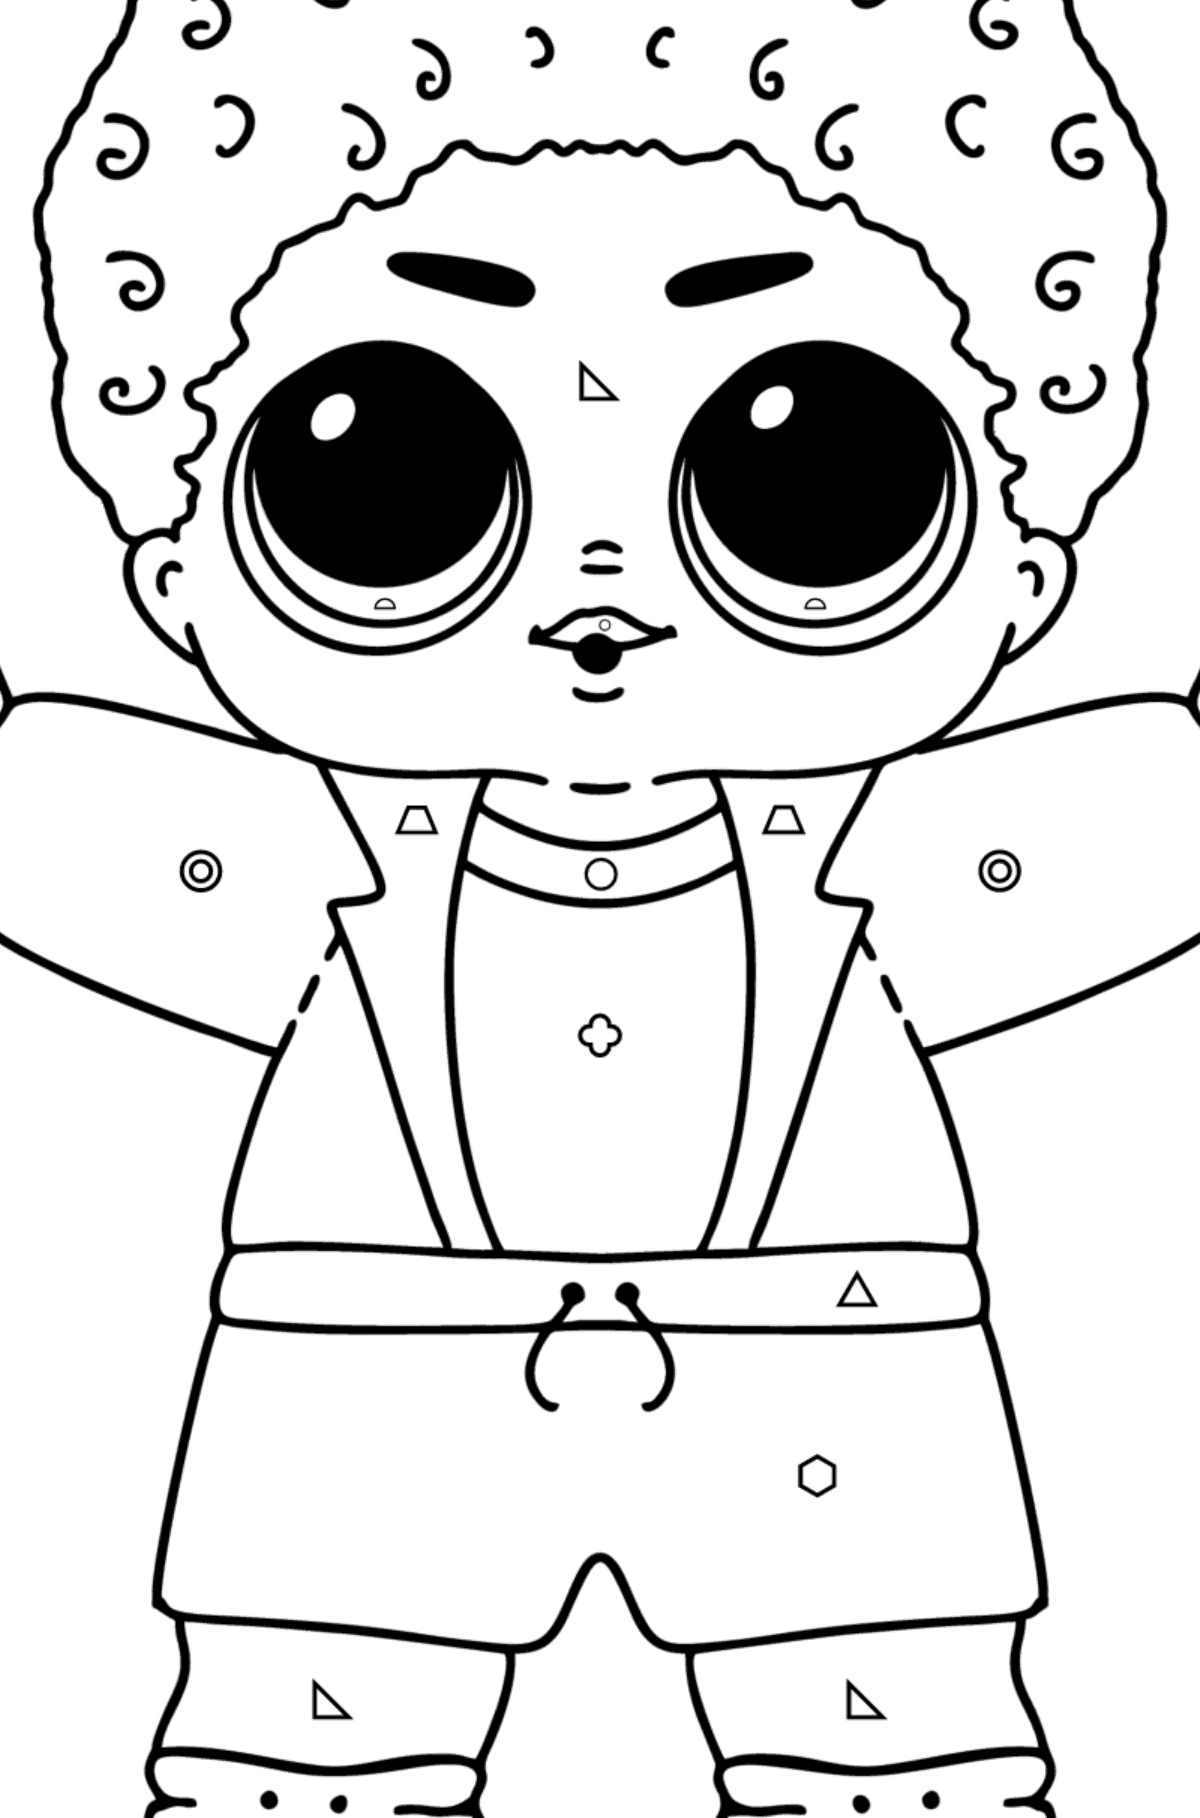 Coloring page LOL boy King - Coloring by Geometric Shapes for Kids